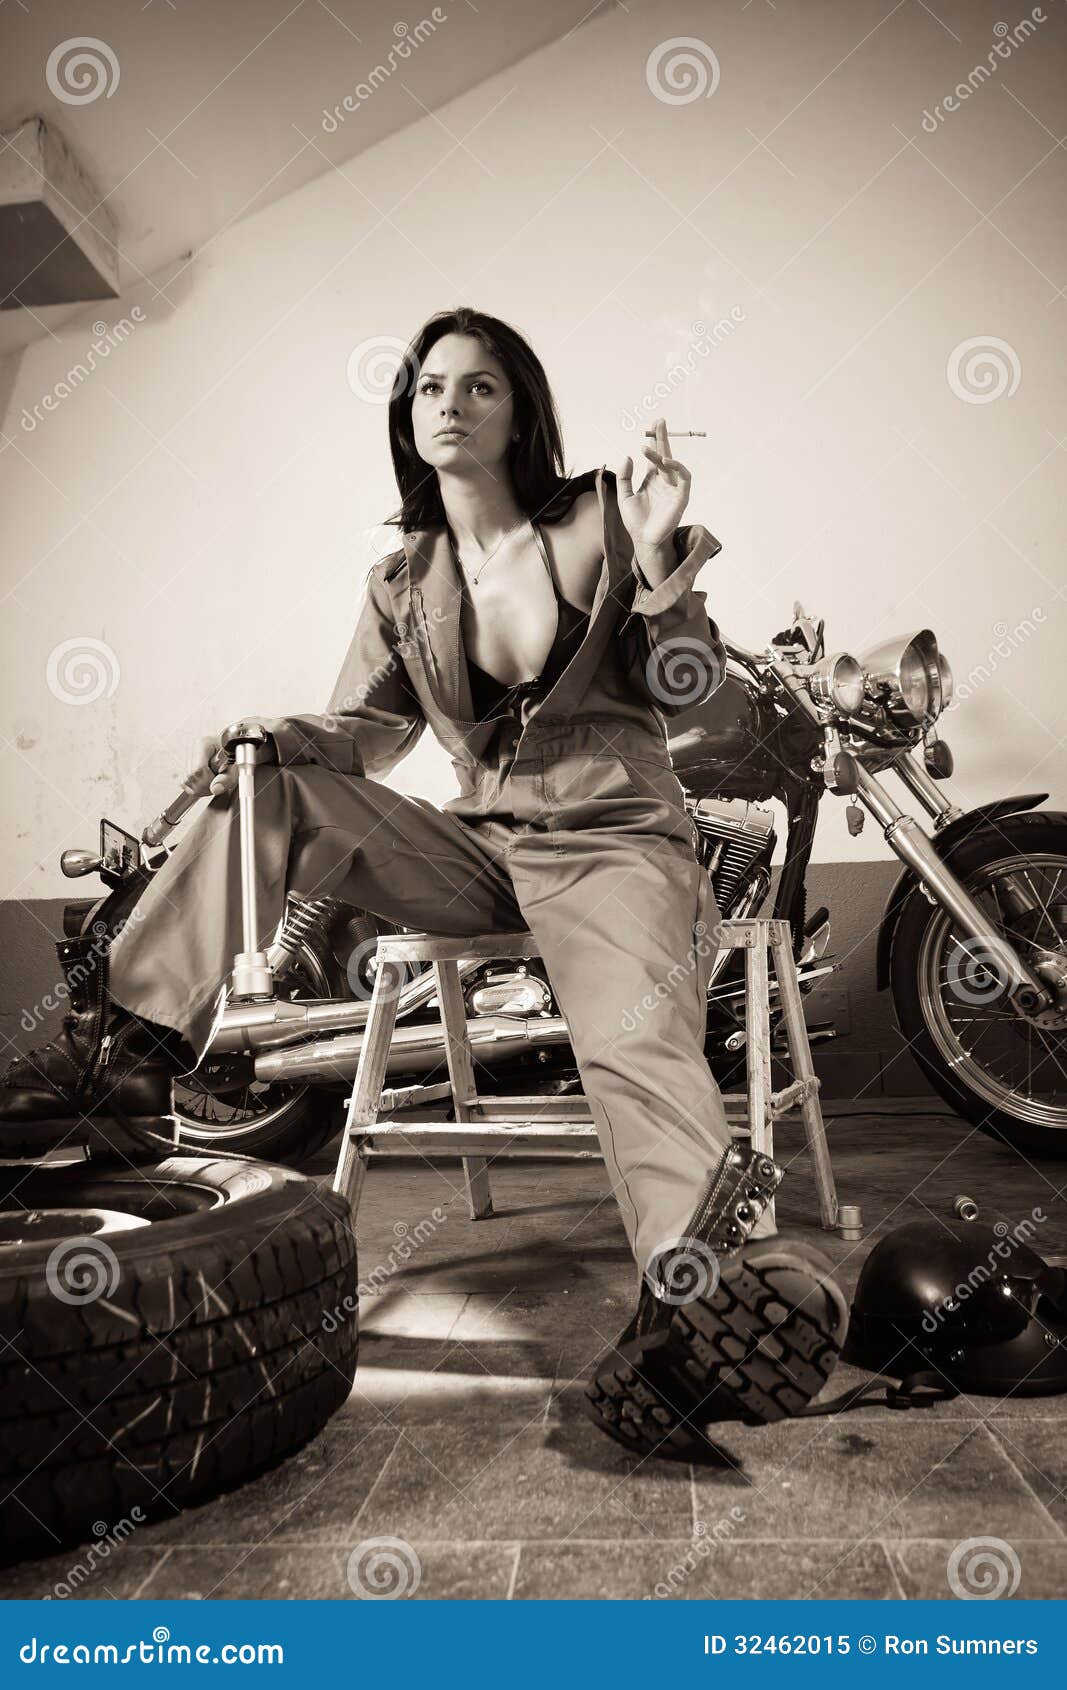 Photo about Photo of a beautiful female mechanic wearing overalls, leather ...